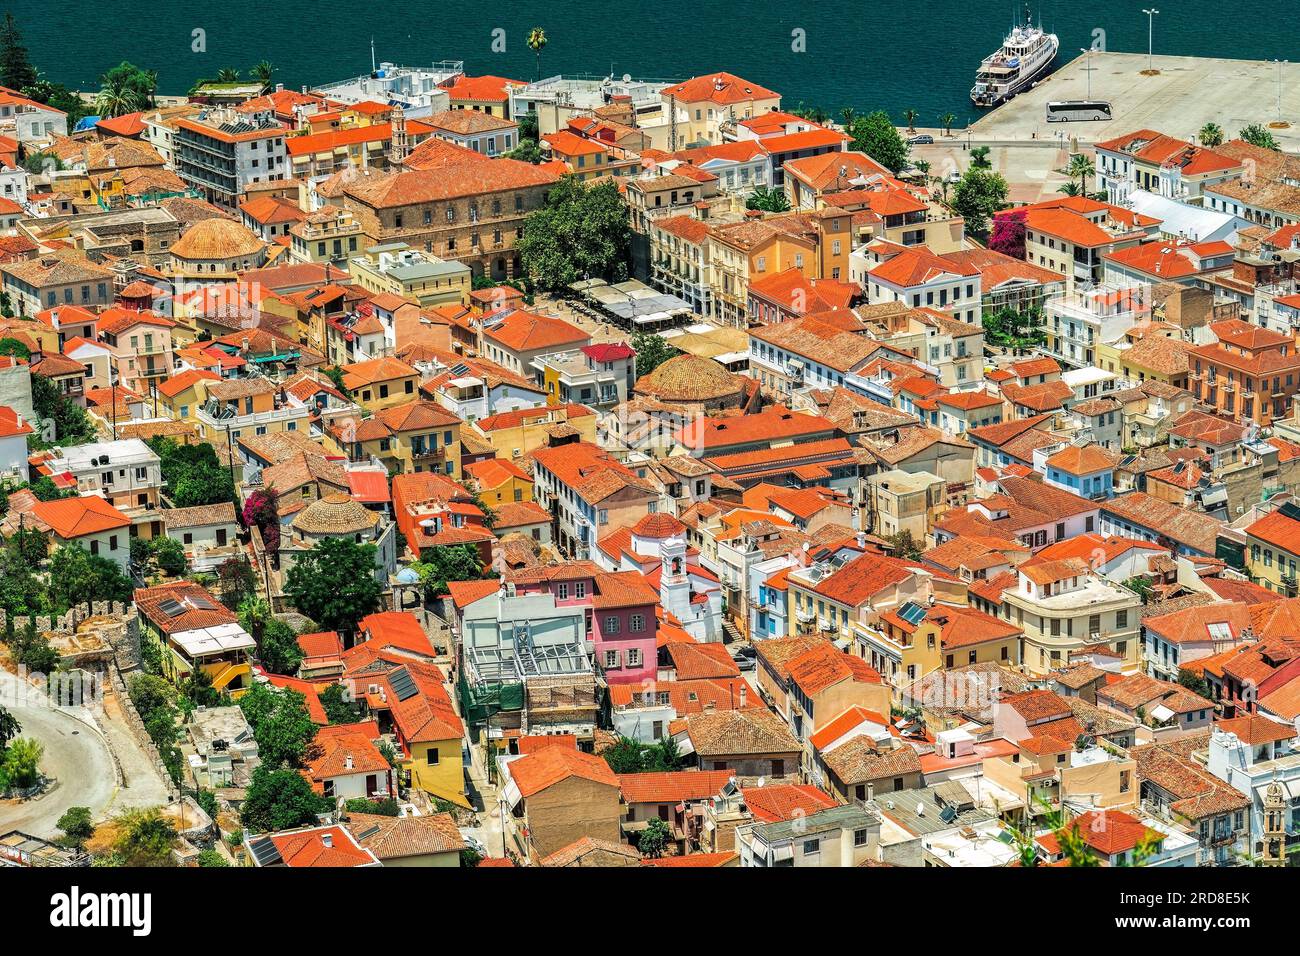 Historic town panoramic view, with traditional low-rise red tile roof buildings, Nafplion, Peloponnese, Greece, Europe Stock Photo